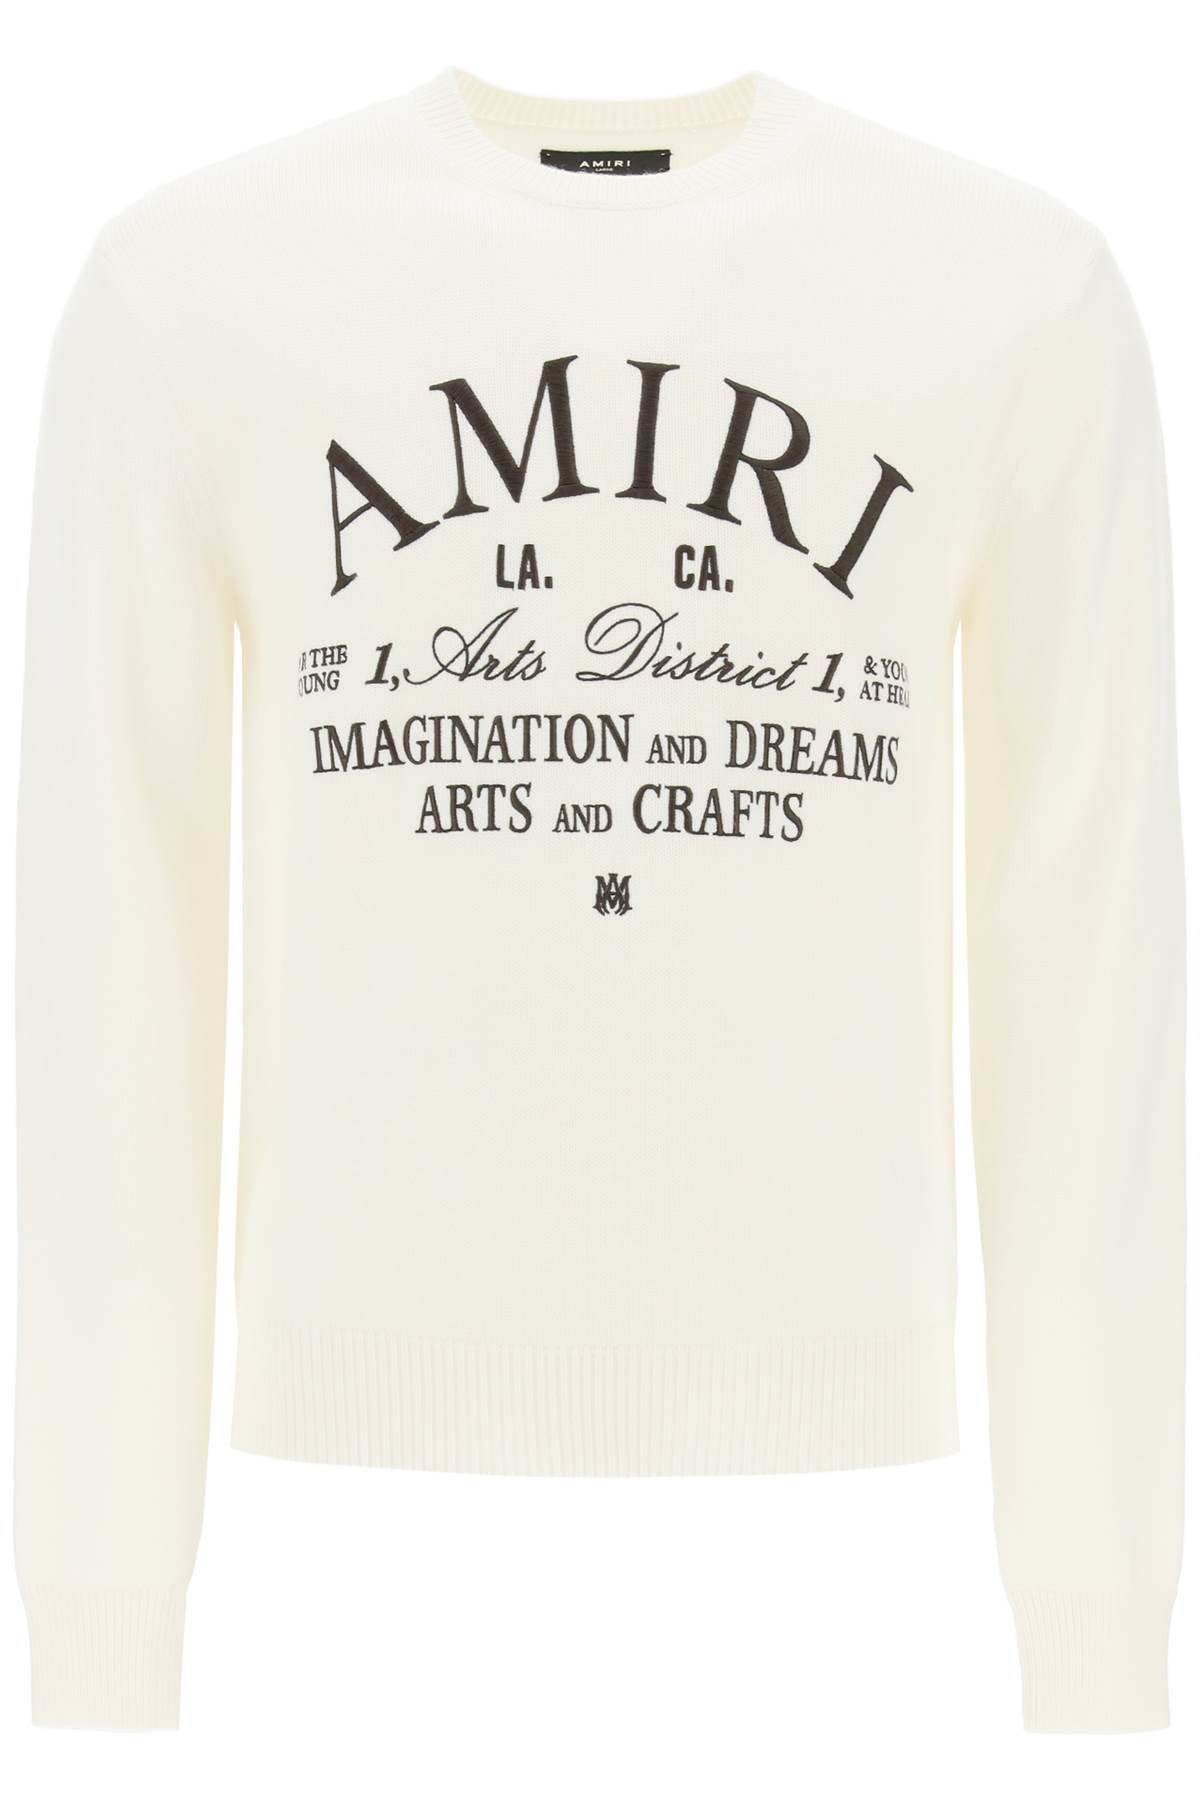 Arts District Wool Sweater - White